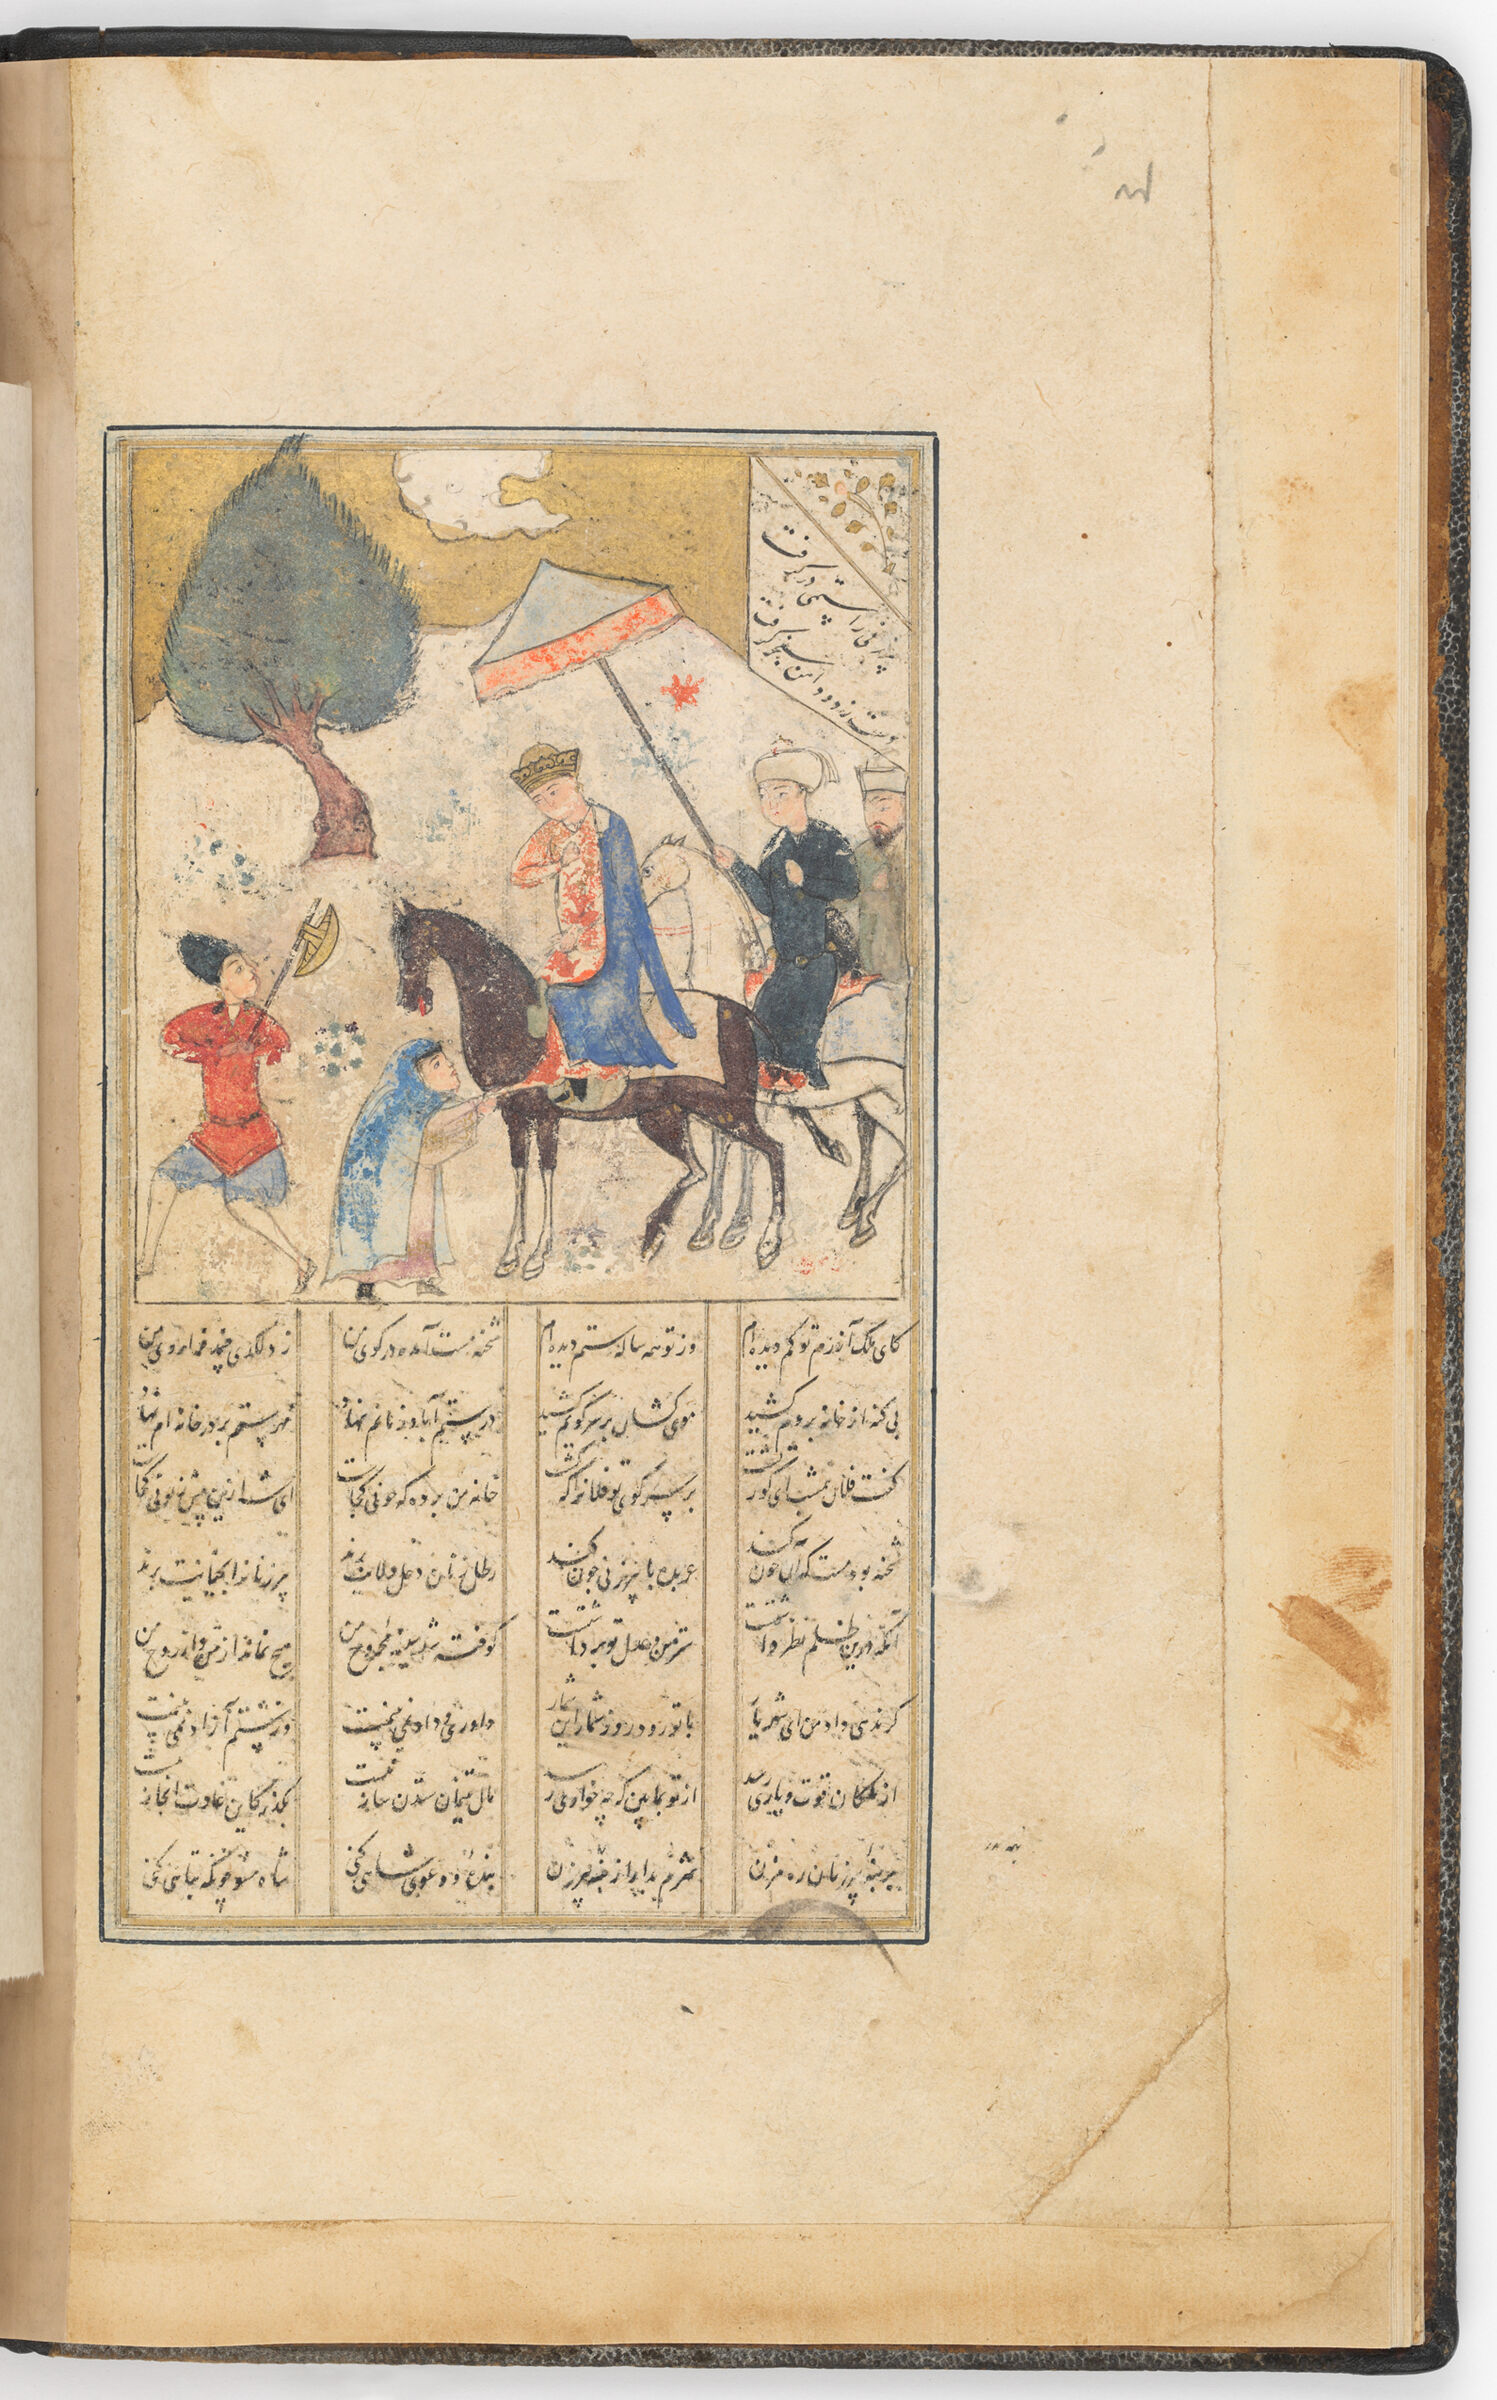 Sultan Sanjar And The Old Woman (Text Recto; Painting Verso Of Folio 18), Painting From A Manuscript Of The Khamsa By Nizami